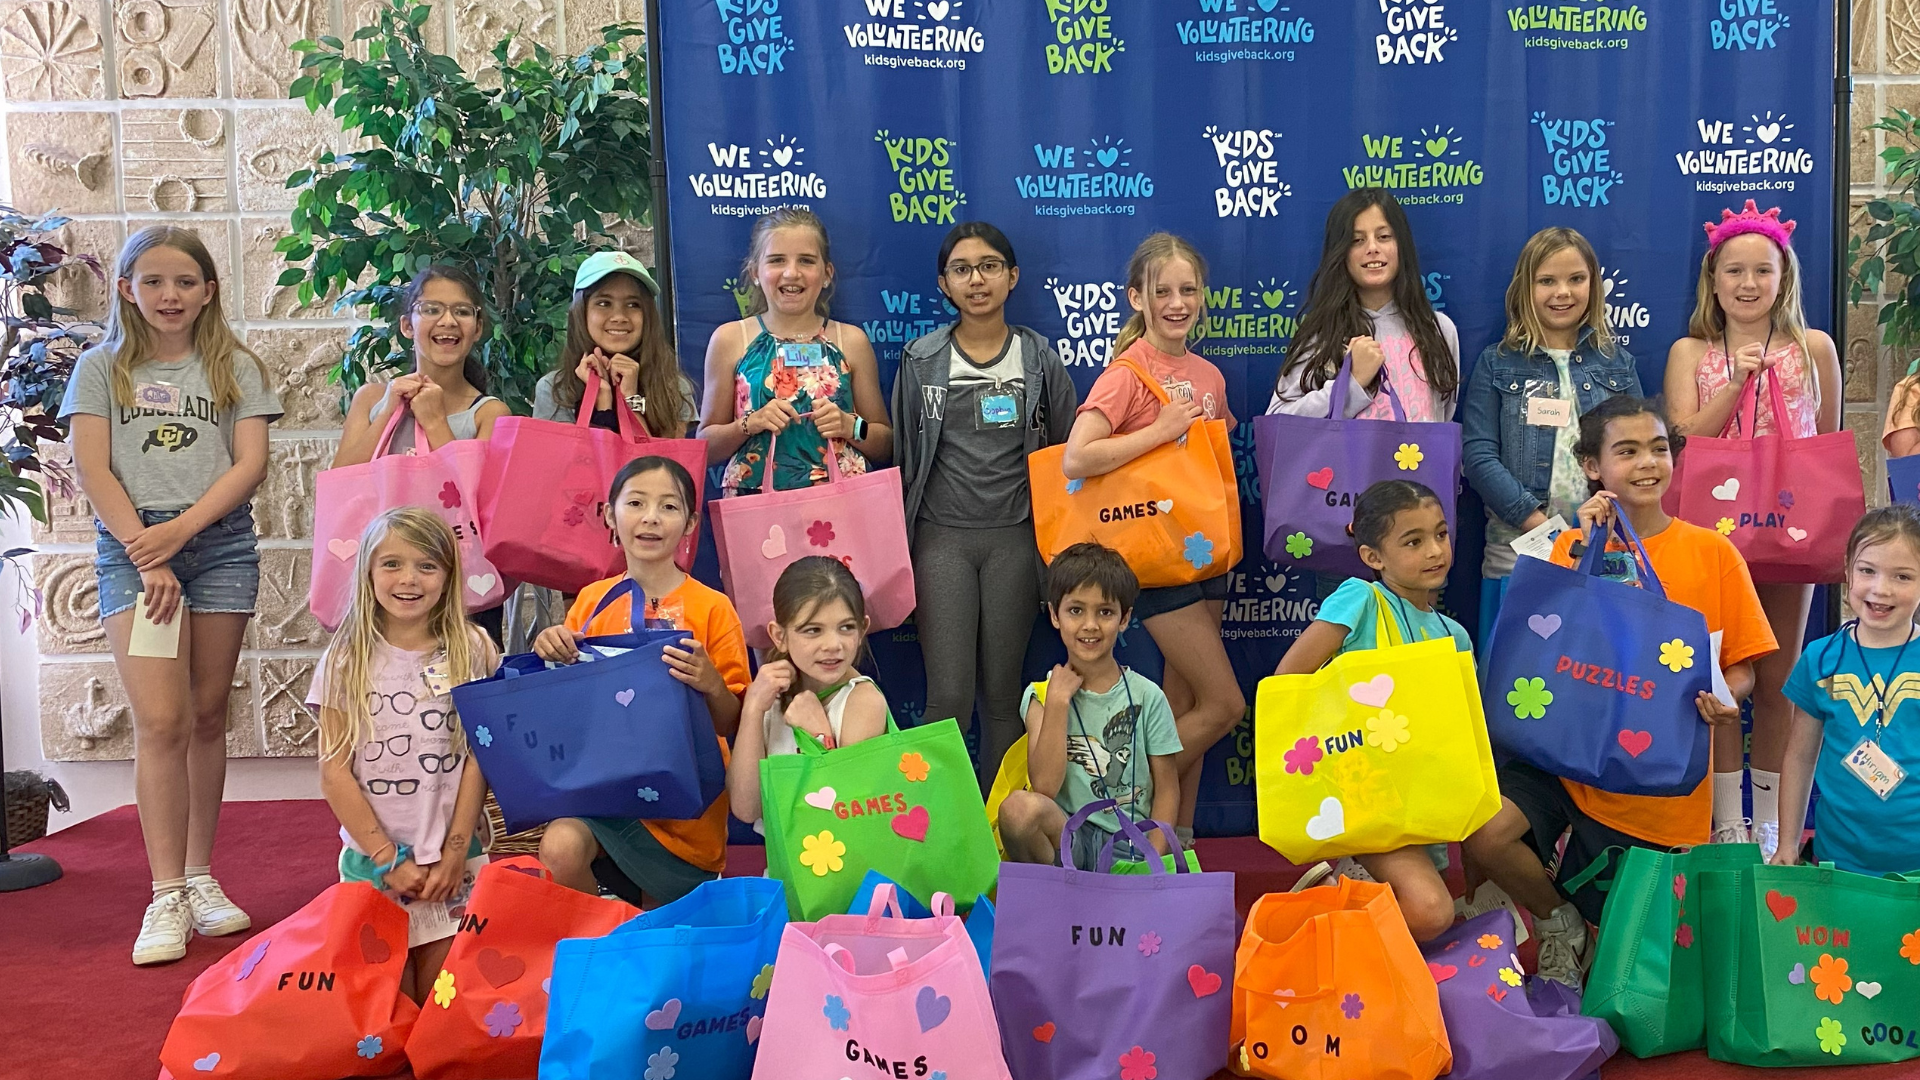 Kids pose with Family Game Night Kits for NVFS.